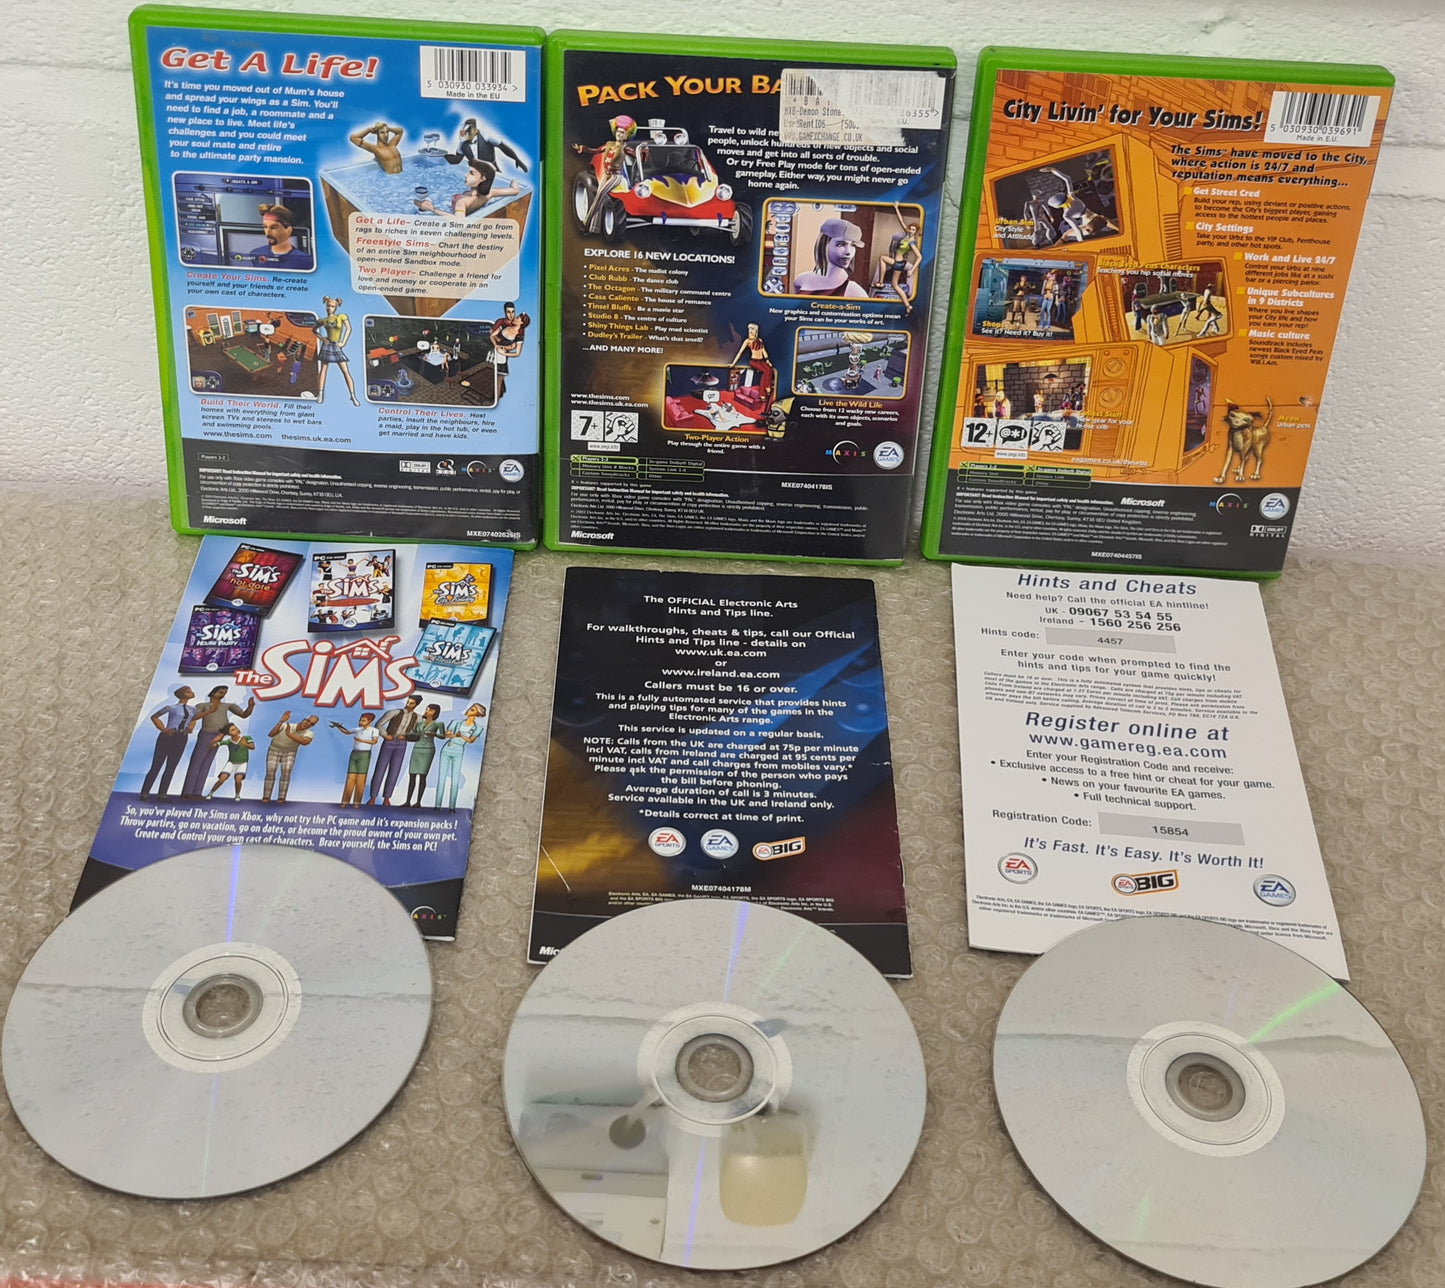 The Sims, Bustin' Out & Urbz Microsoft Xbox Game Bundle